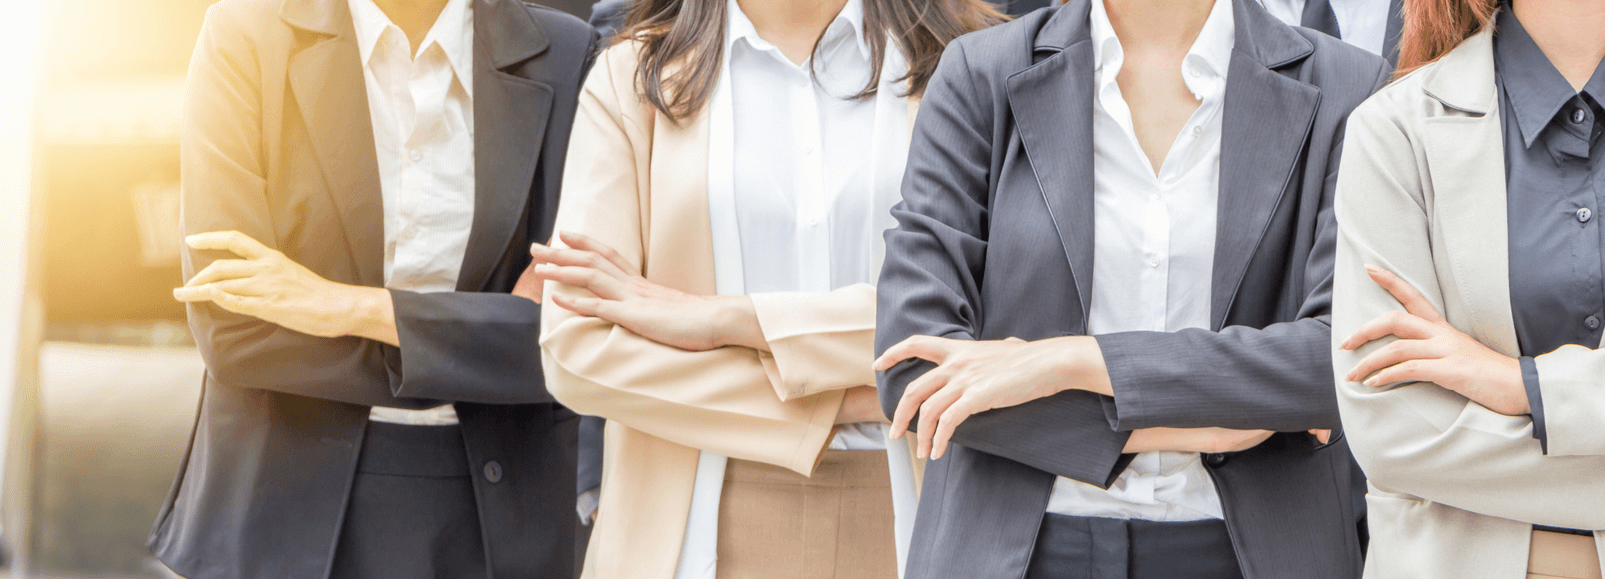 Women-in-the-Workplace-Report-Highlights-EWF